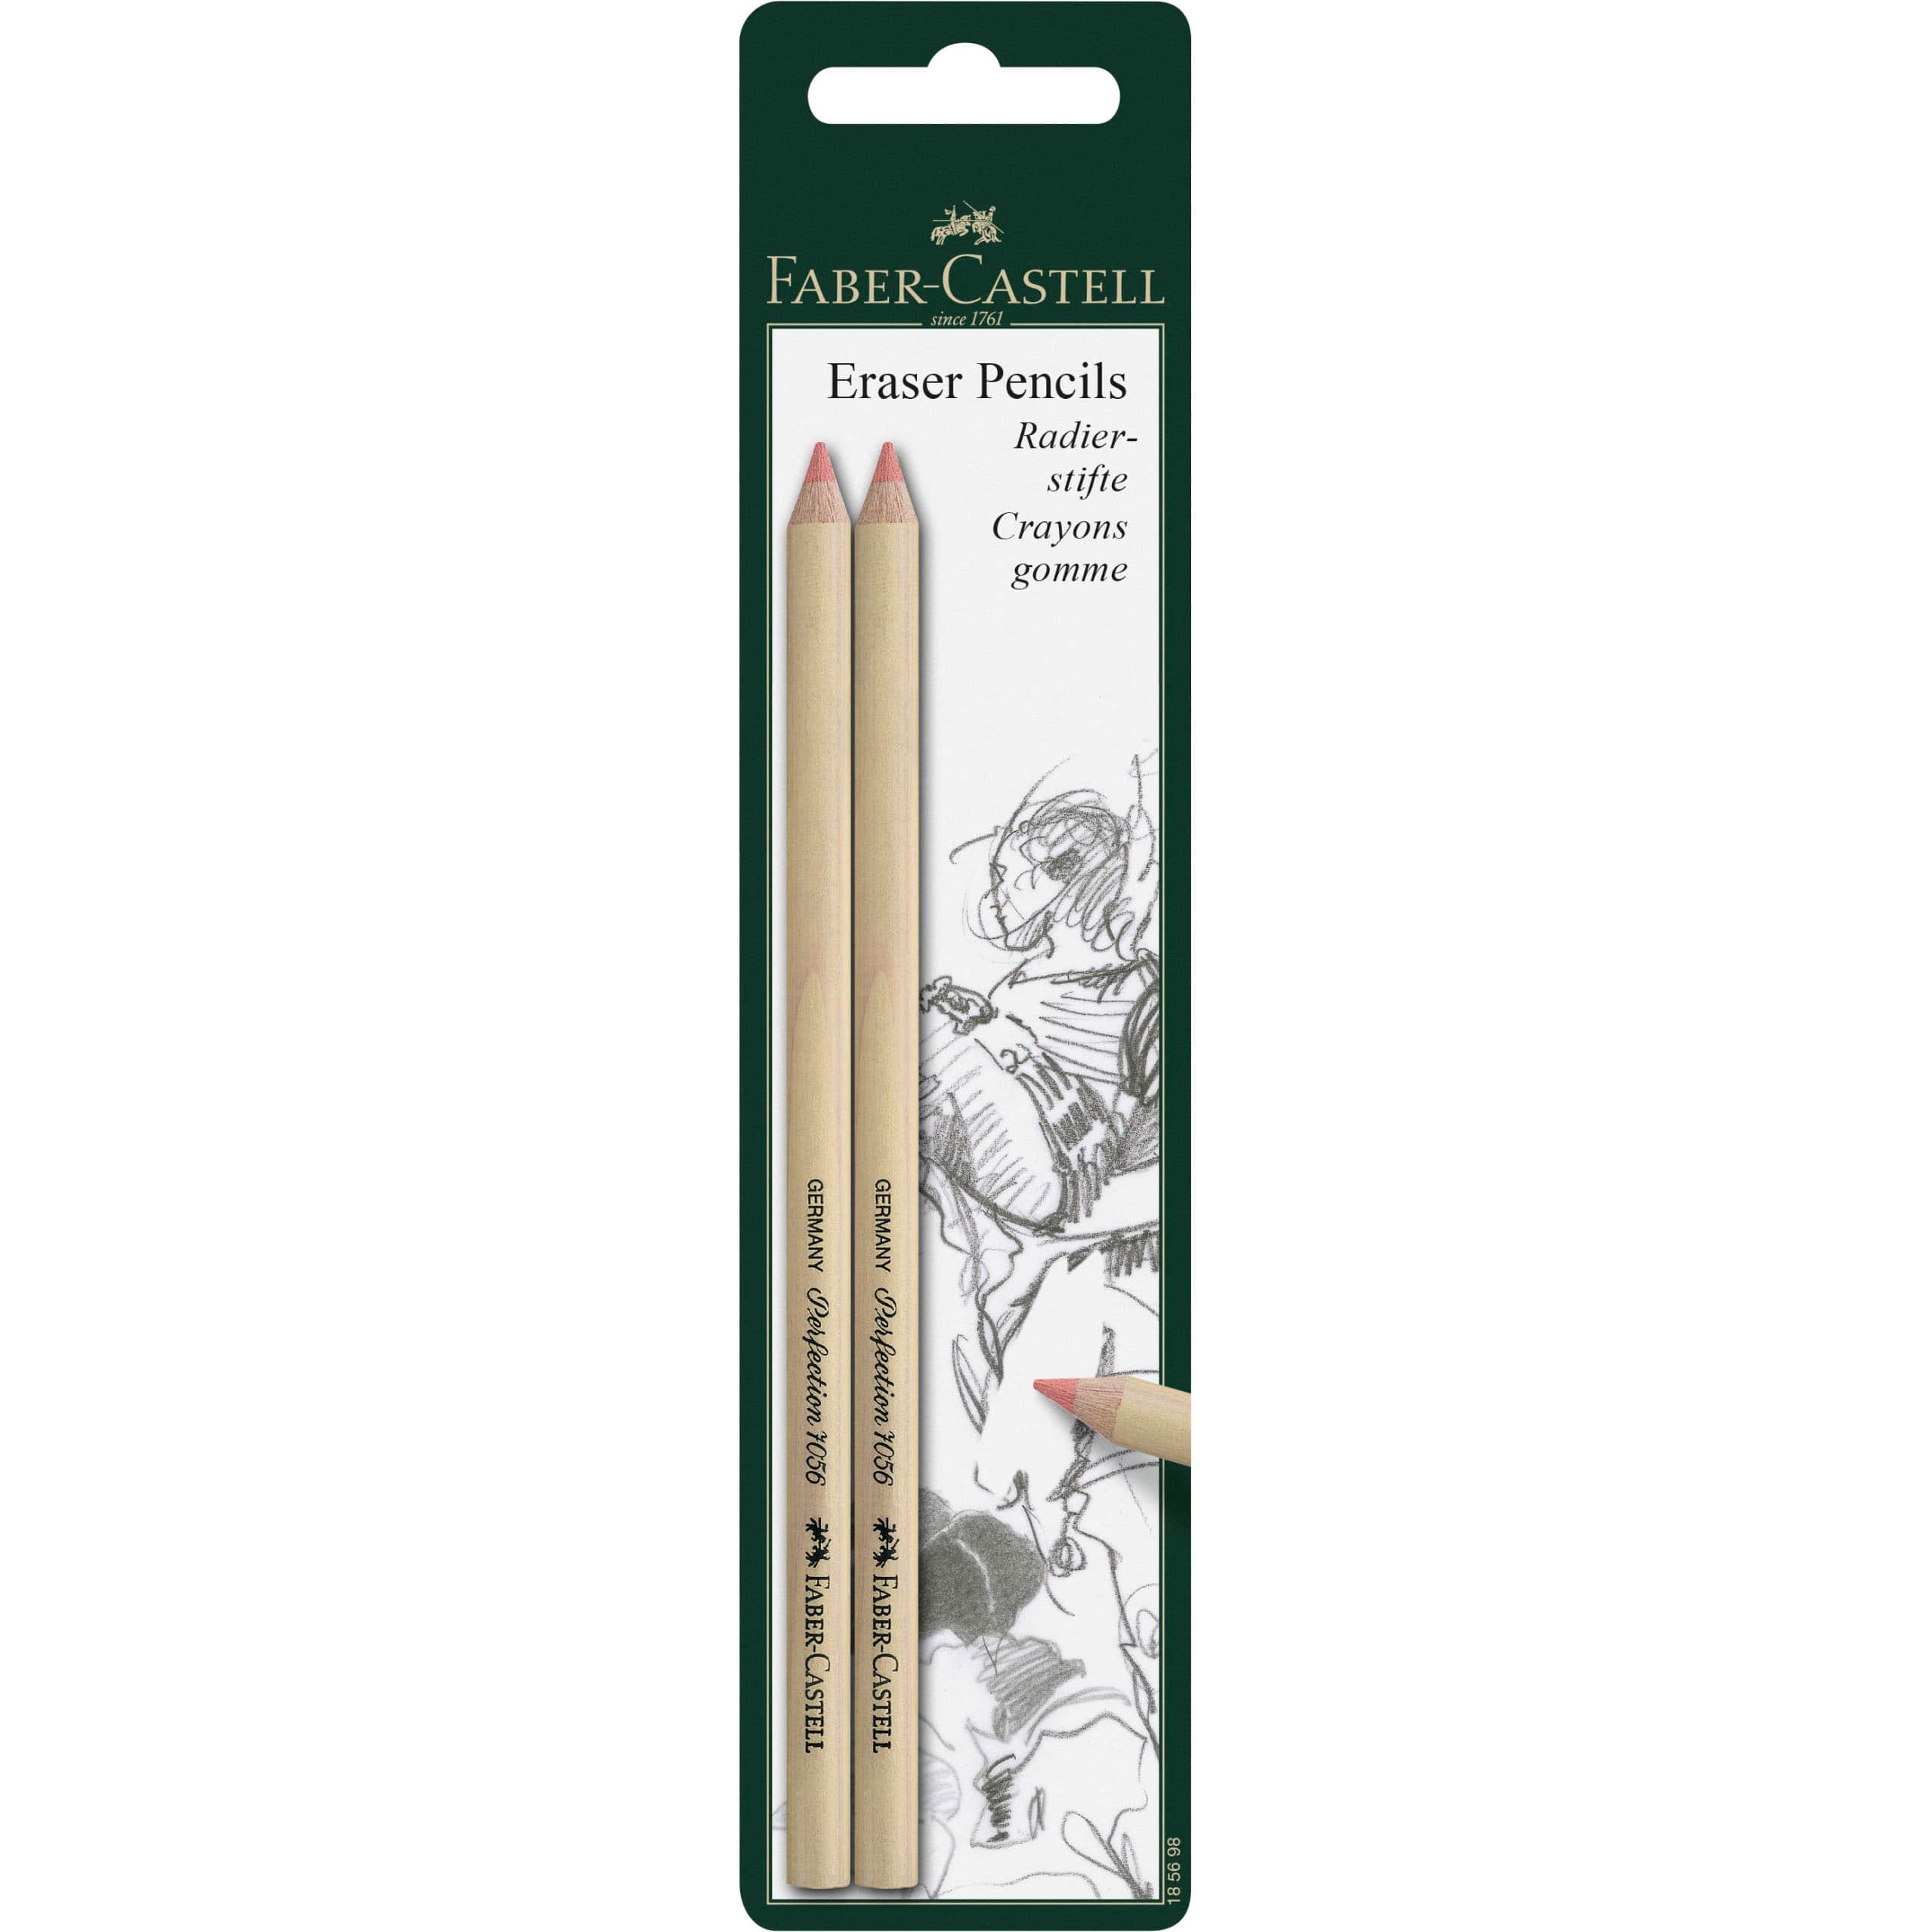 Lartique Art Supplies, 32 Piece Drawing Kit with Drawing Pencils and Drawing Supplies, for Artists